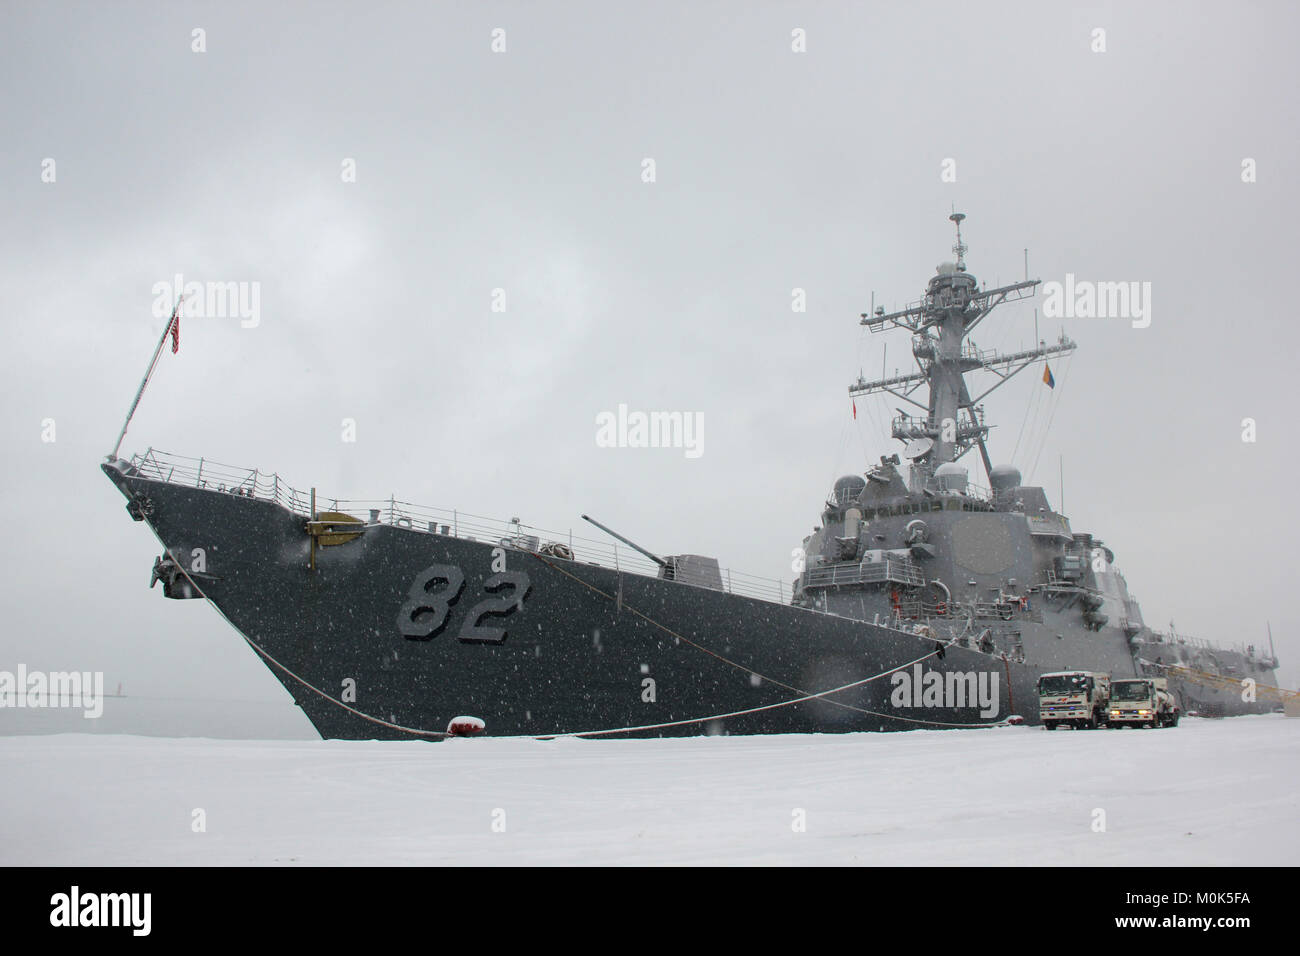 The U.S. Navy Arleigh Burke-class guided-missile destroyer USS Lassen arrives at port February 8, 2013 in Otaru, Japan. Stock Photo